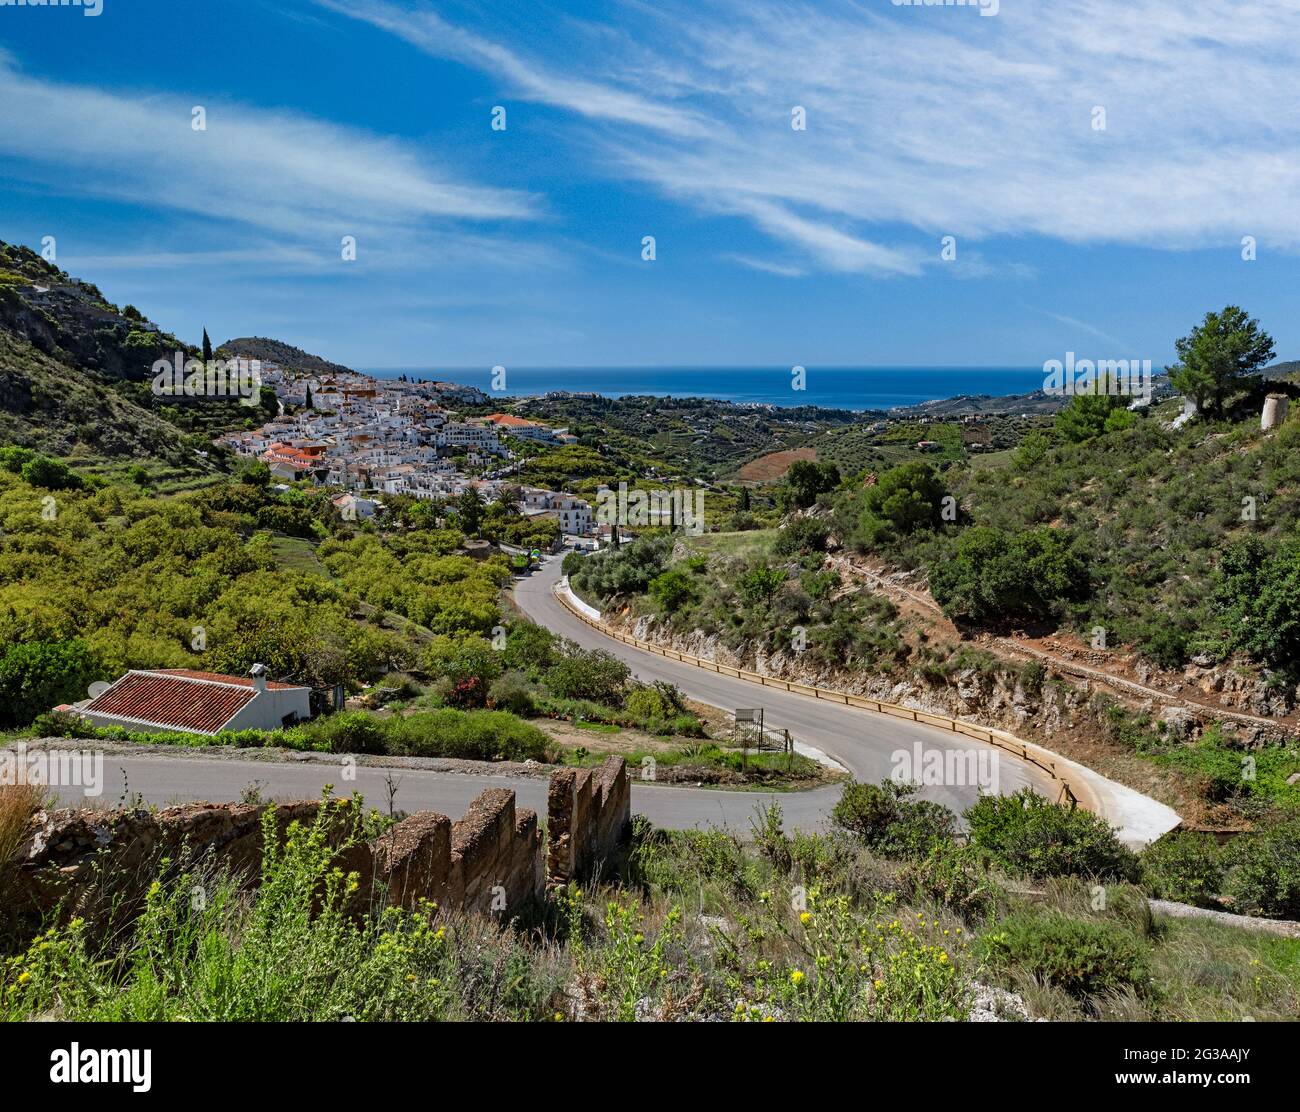 The mountain road to Torrox from Frigiliana, often described as 'Spain's most beautiful and well-preserved village'  and also known as the 'white vill Stock Photo